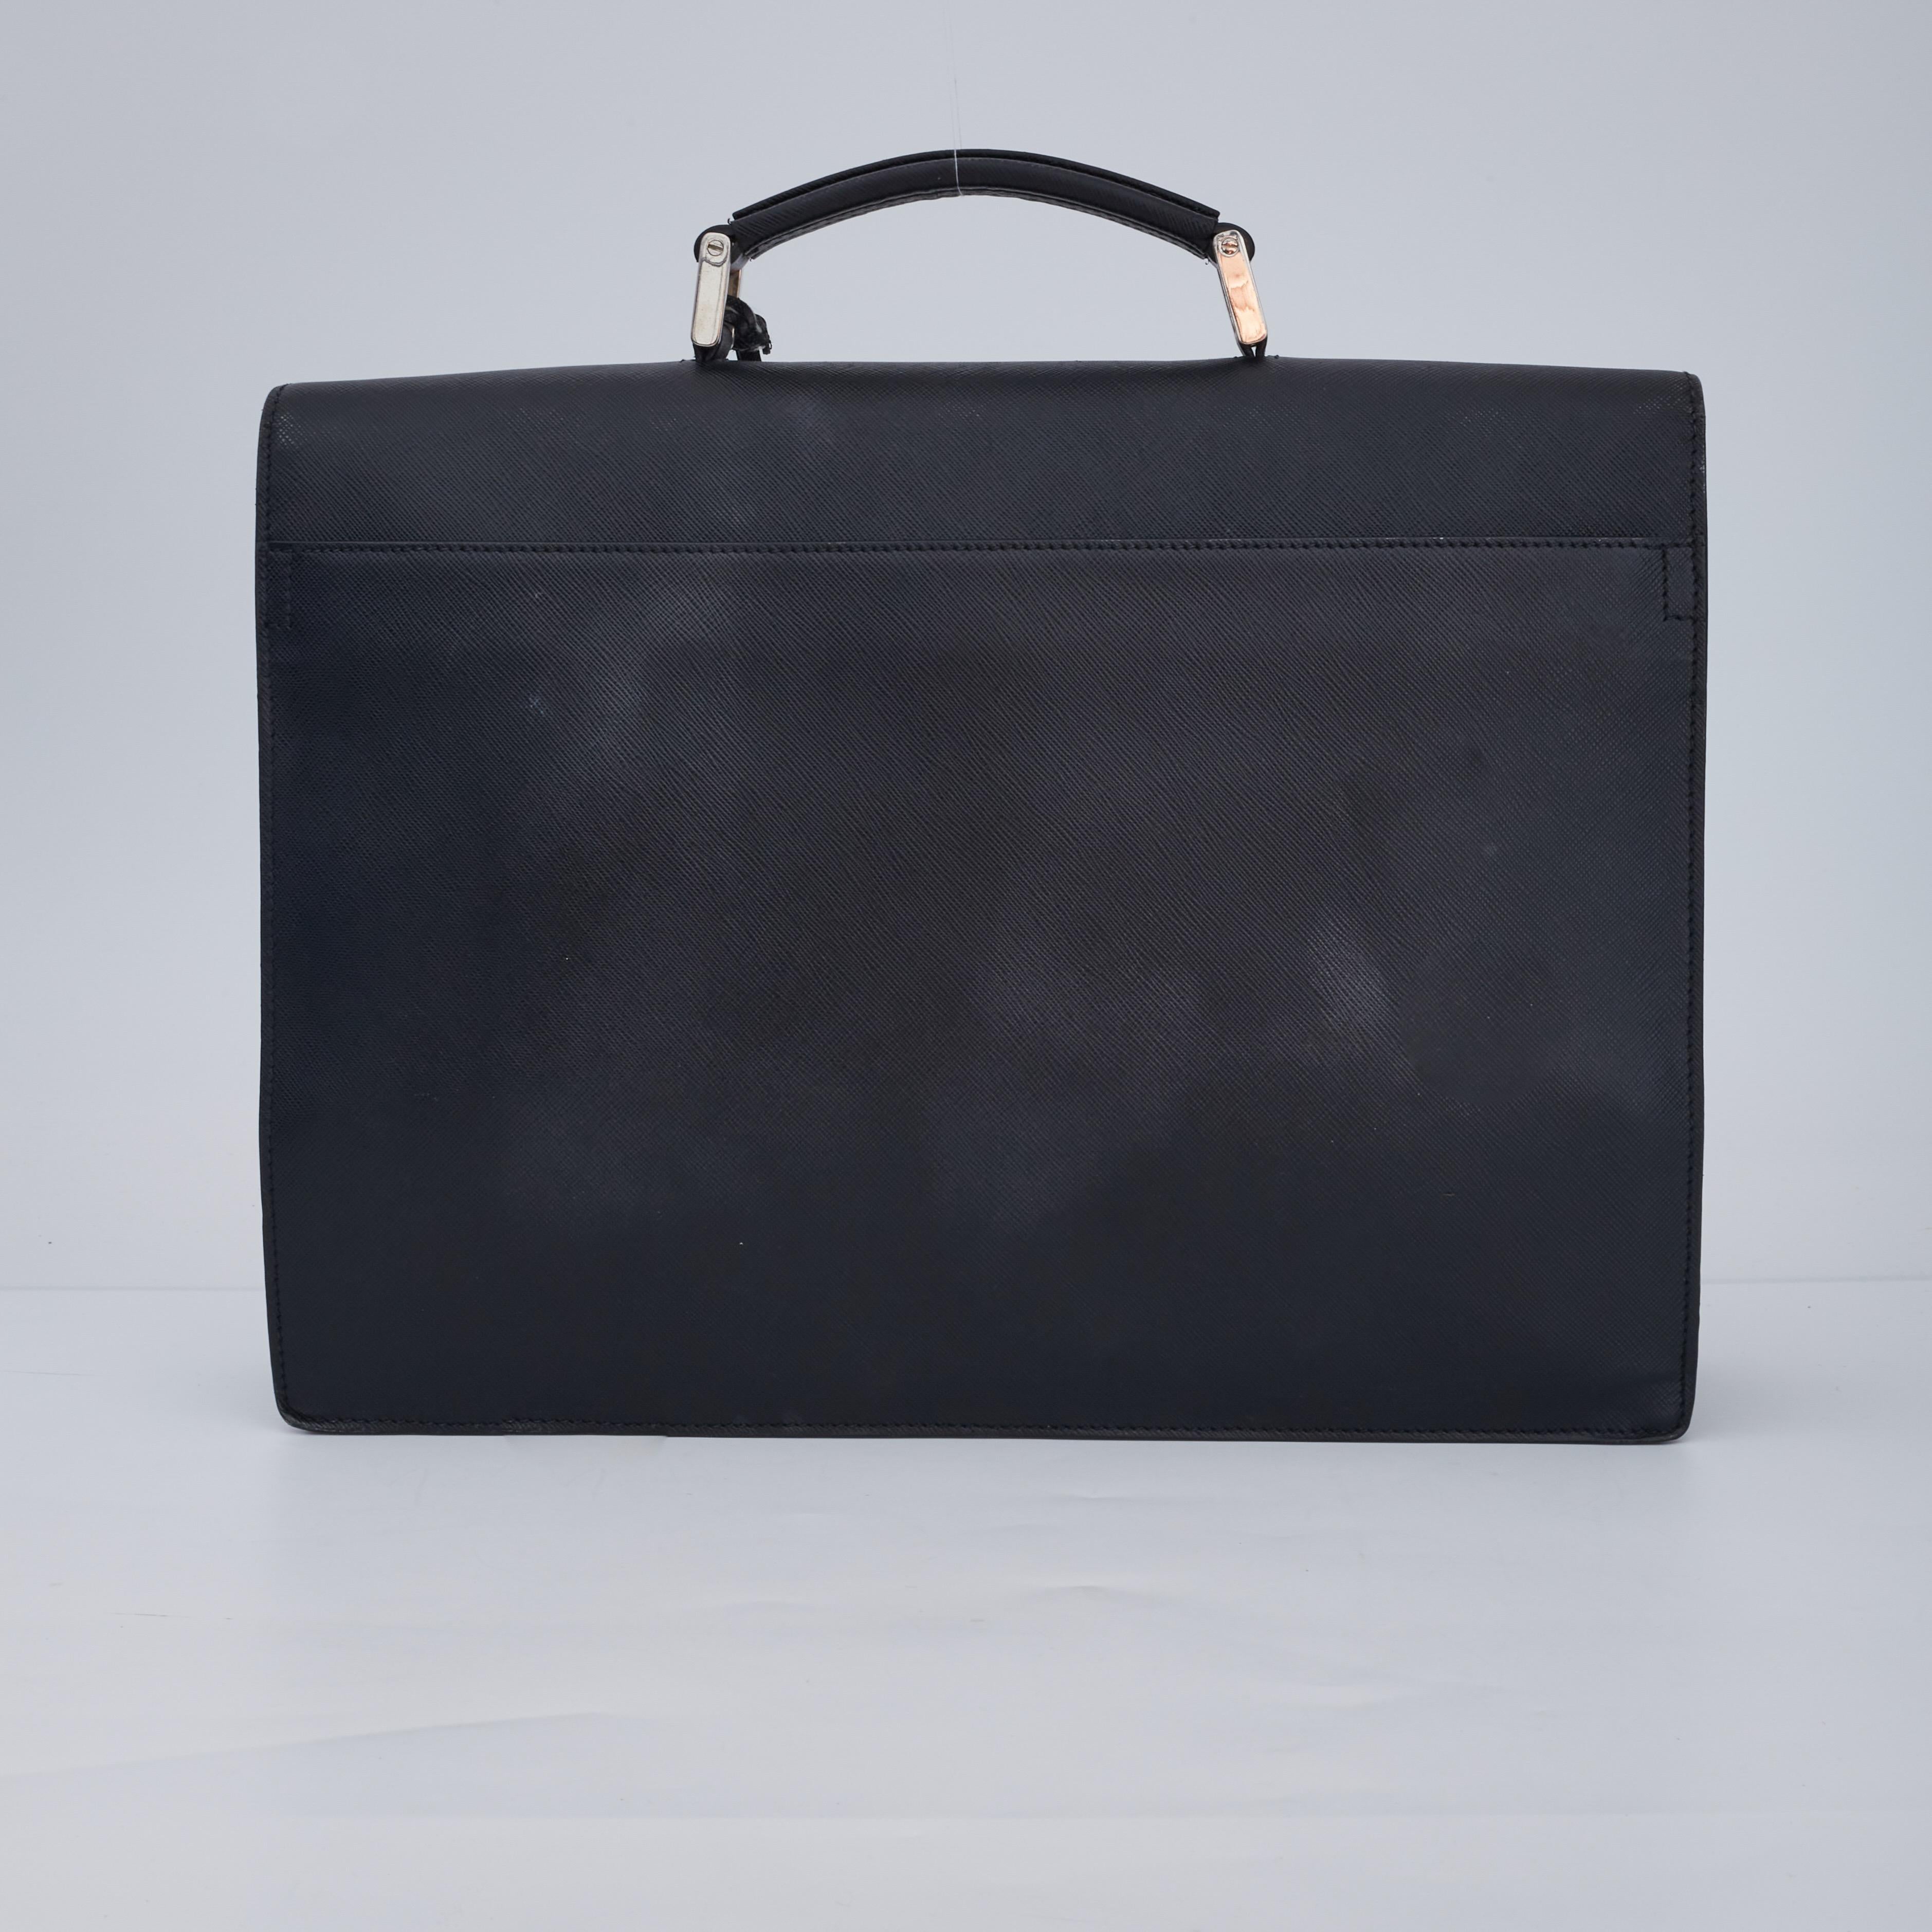 COLOR: Black
MATERIAL: Leather
ITEM CODE: 134
MEASURES: H 11.5” x L 14.97” x D 3.5”
DROP: 2”
COMES WITH: Key attached
CONDITION: Good - light scuff marks to exterior, overall very clean, faint scratches.

Made in Italy